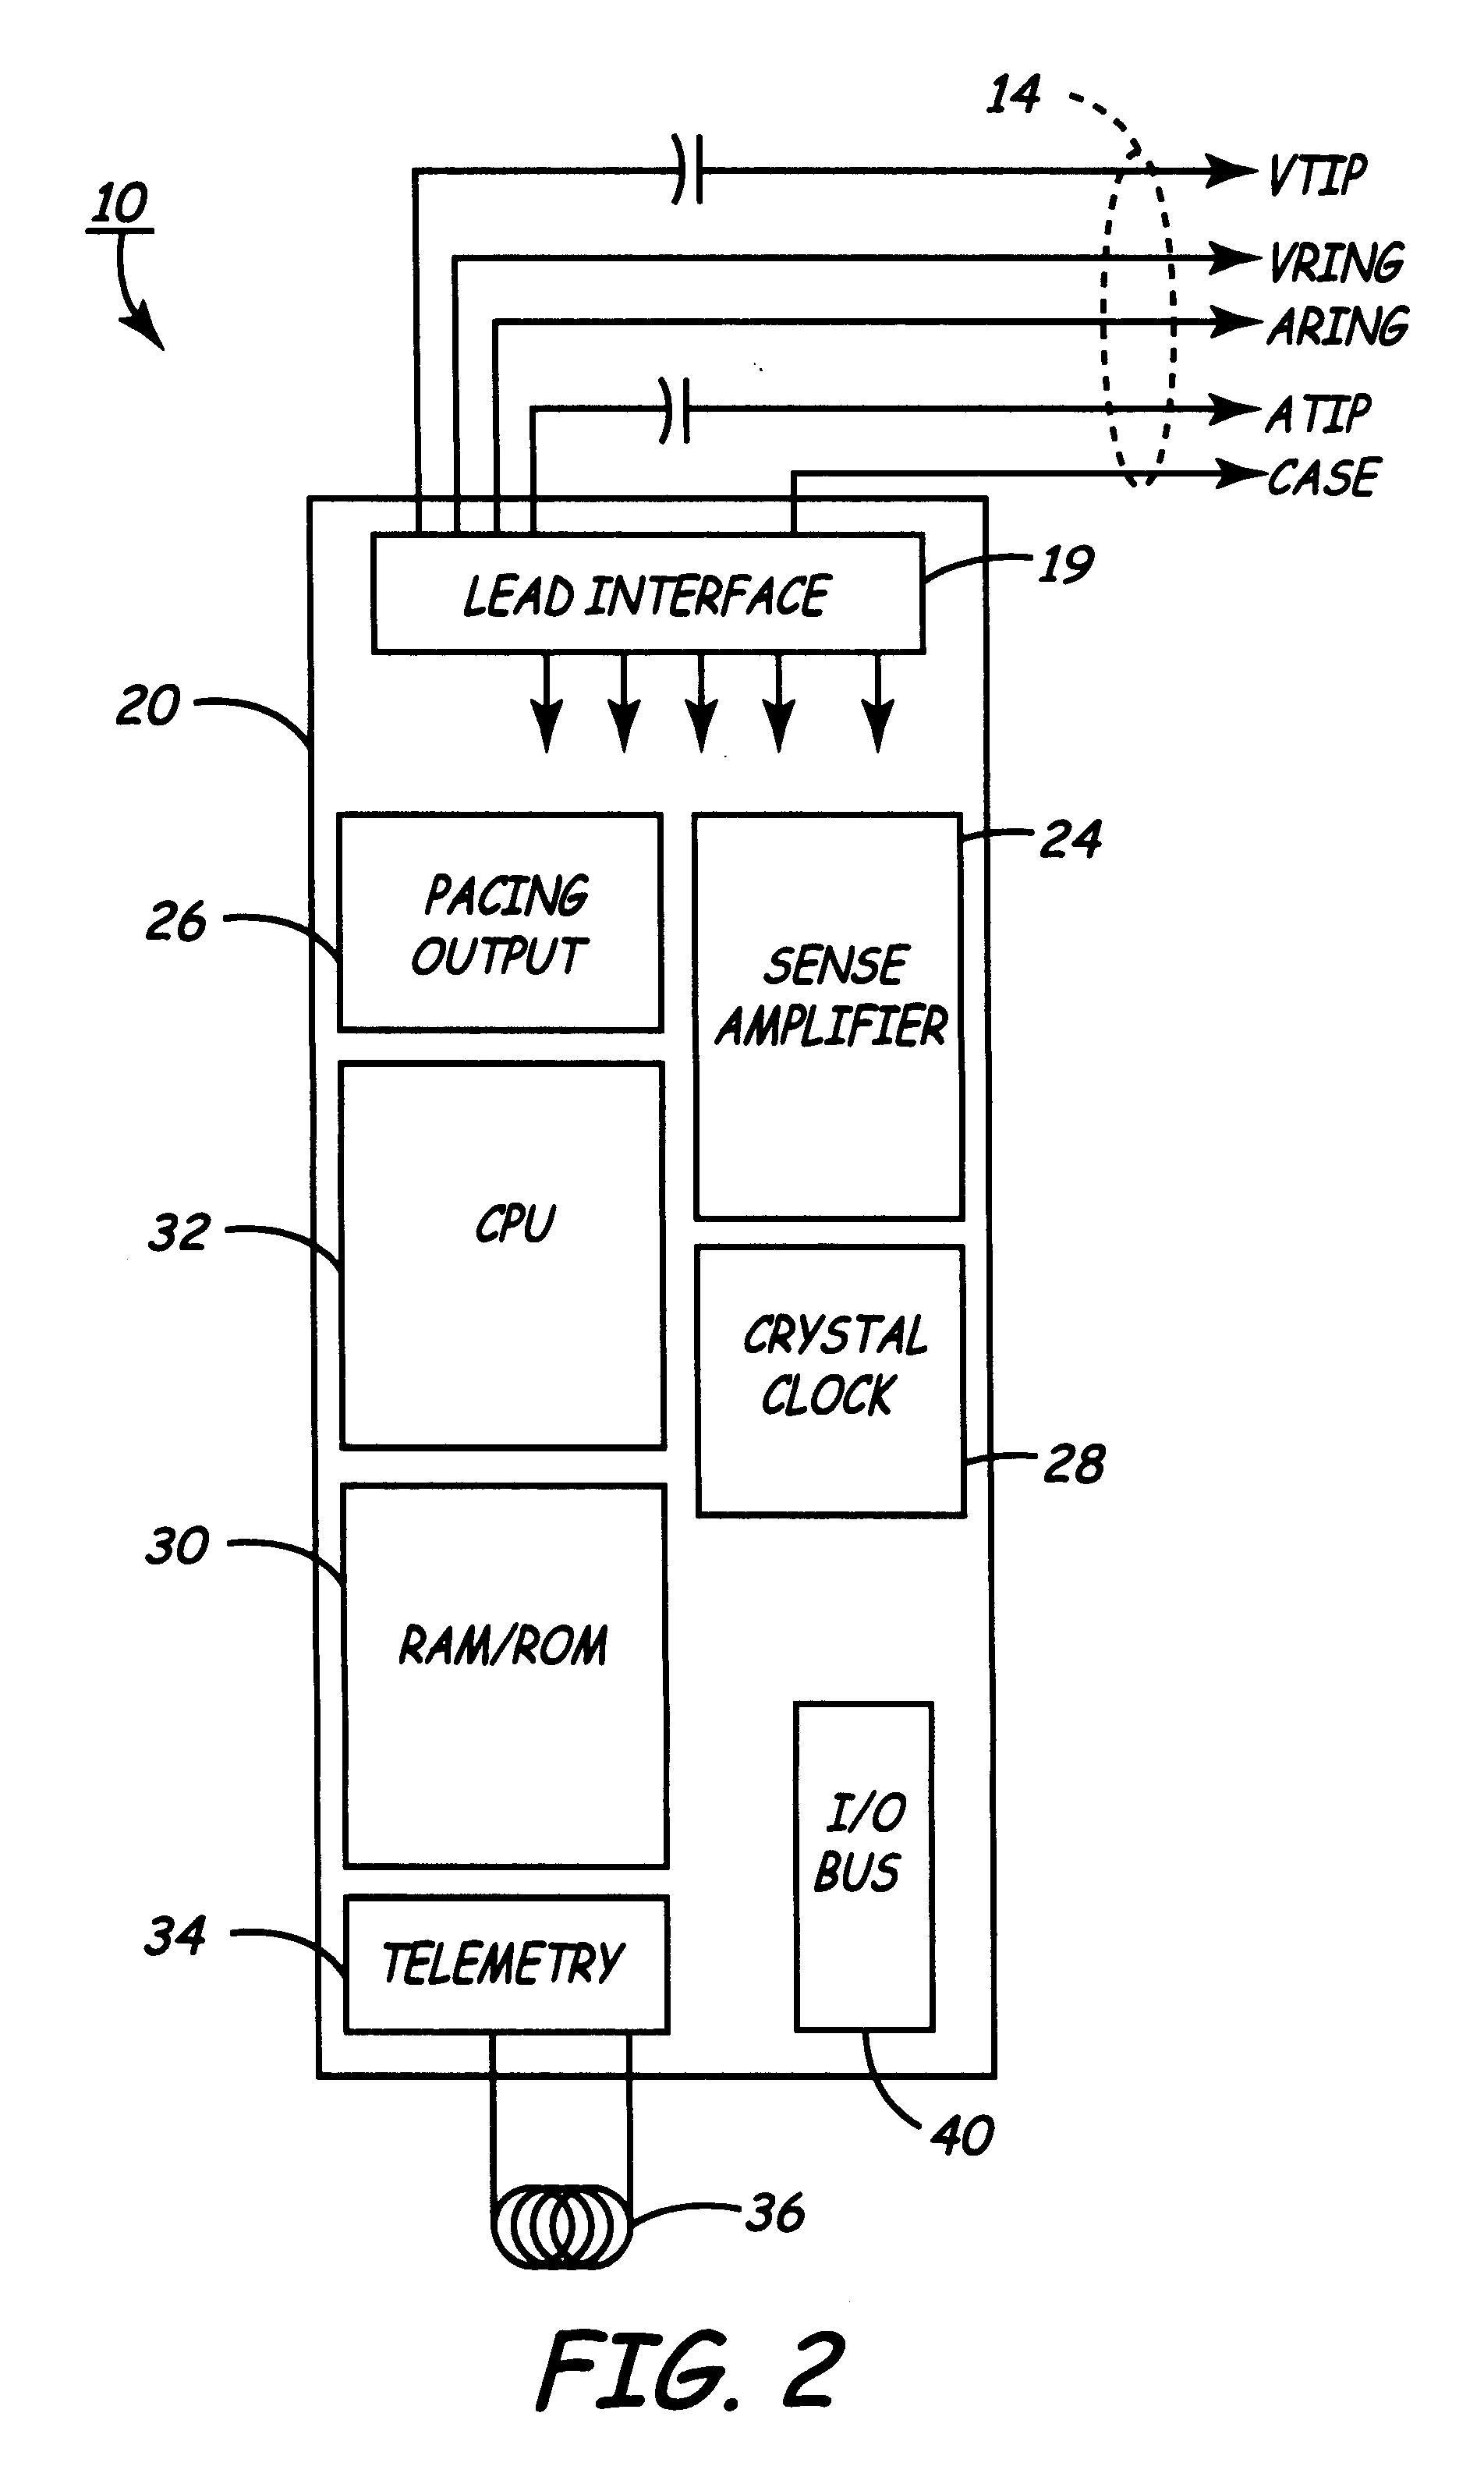 Method and apparatus for displaying information retrieved from an implanted medical device